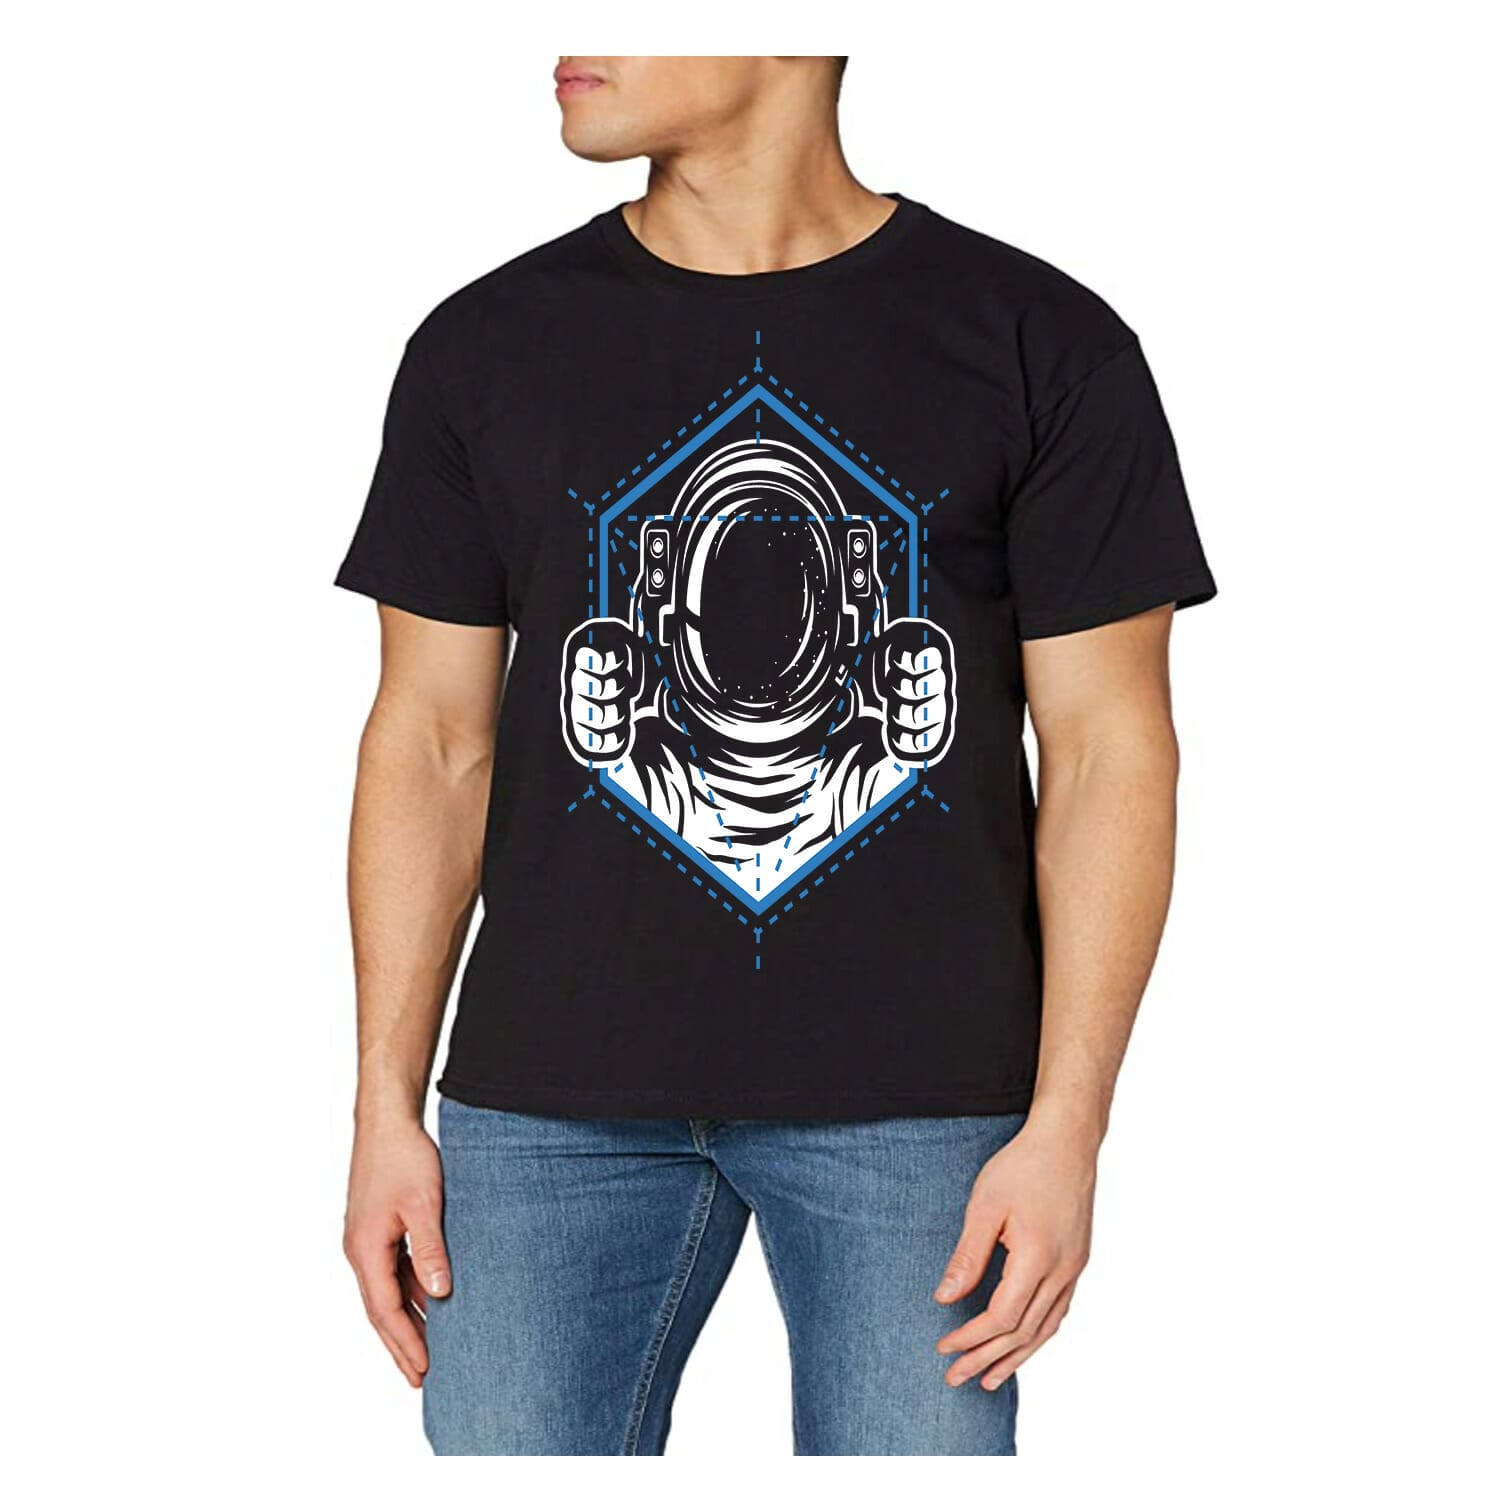 Astronaut Holding On To A Window Tshirt Design